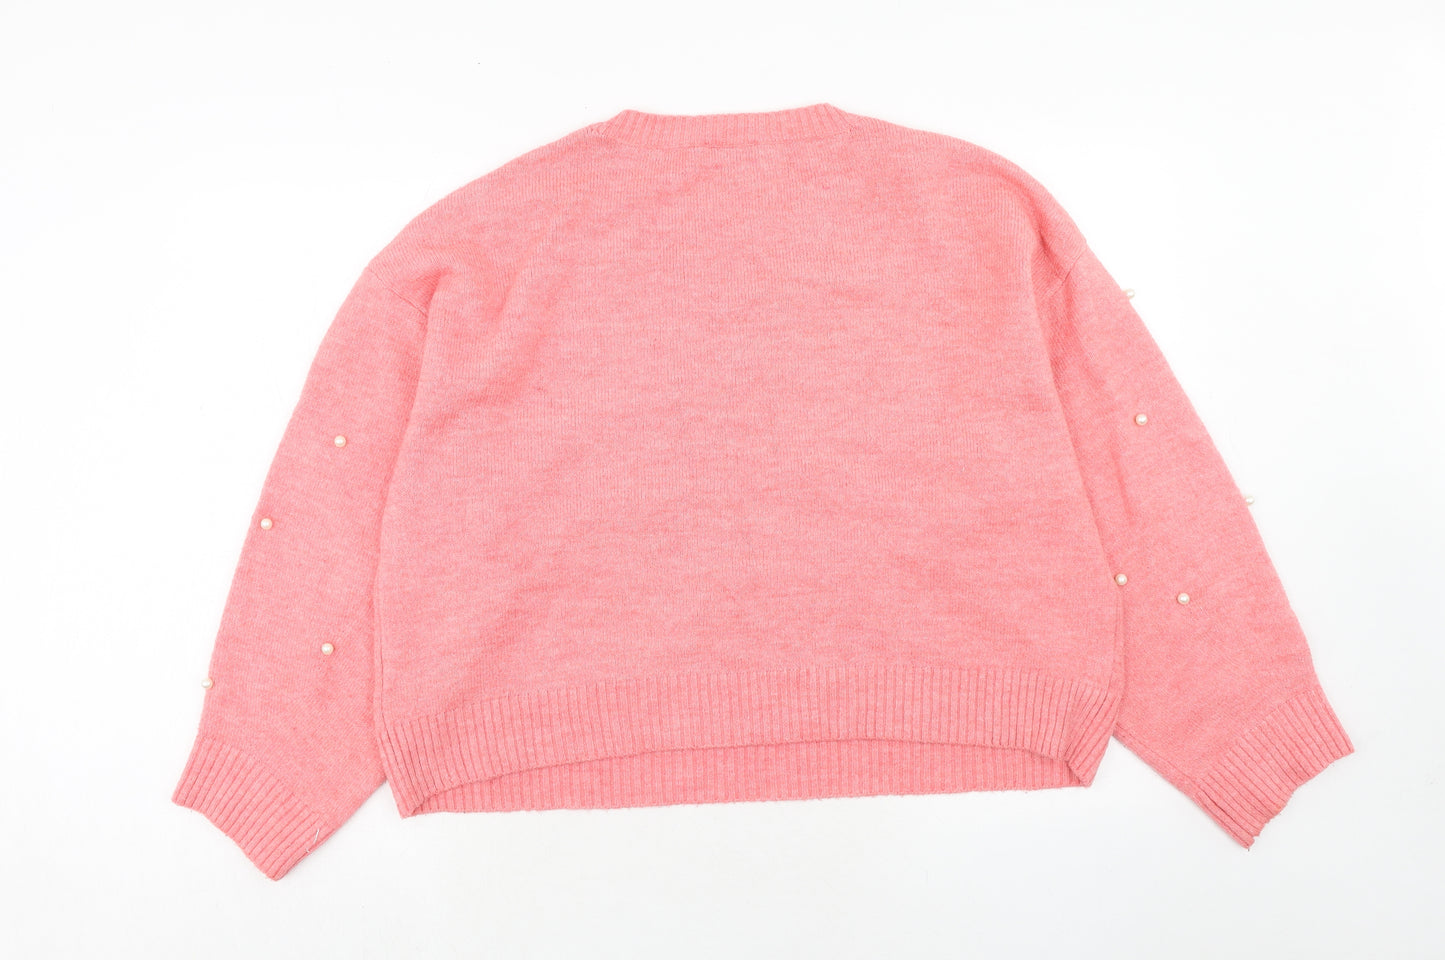 New Look Womens Pink Round Neck Acrylic Pullover Jumper Size L